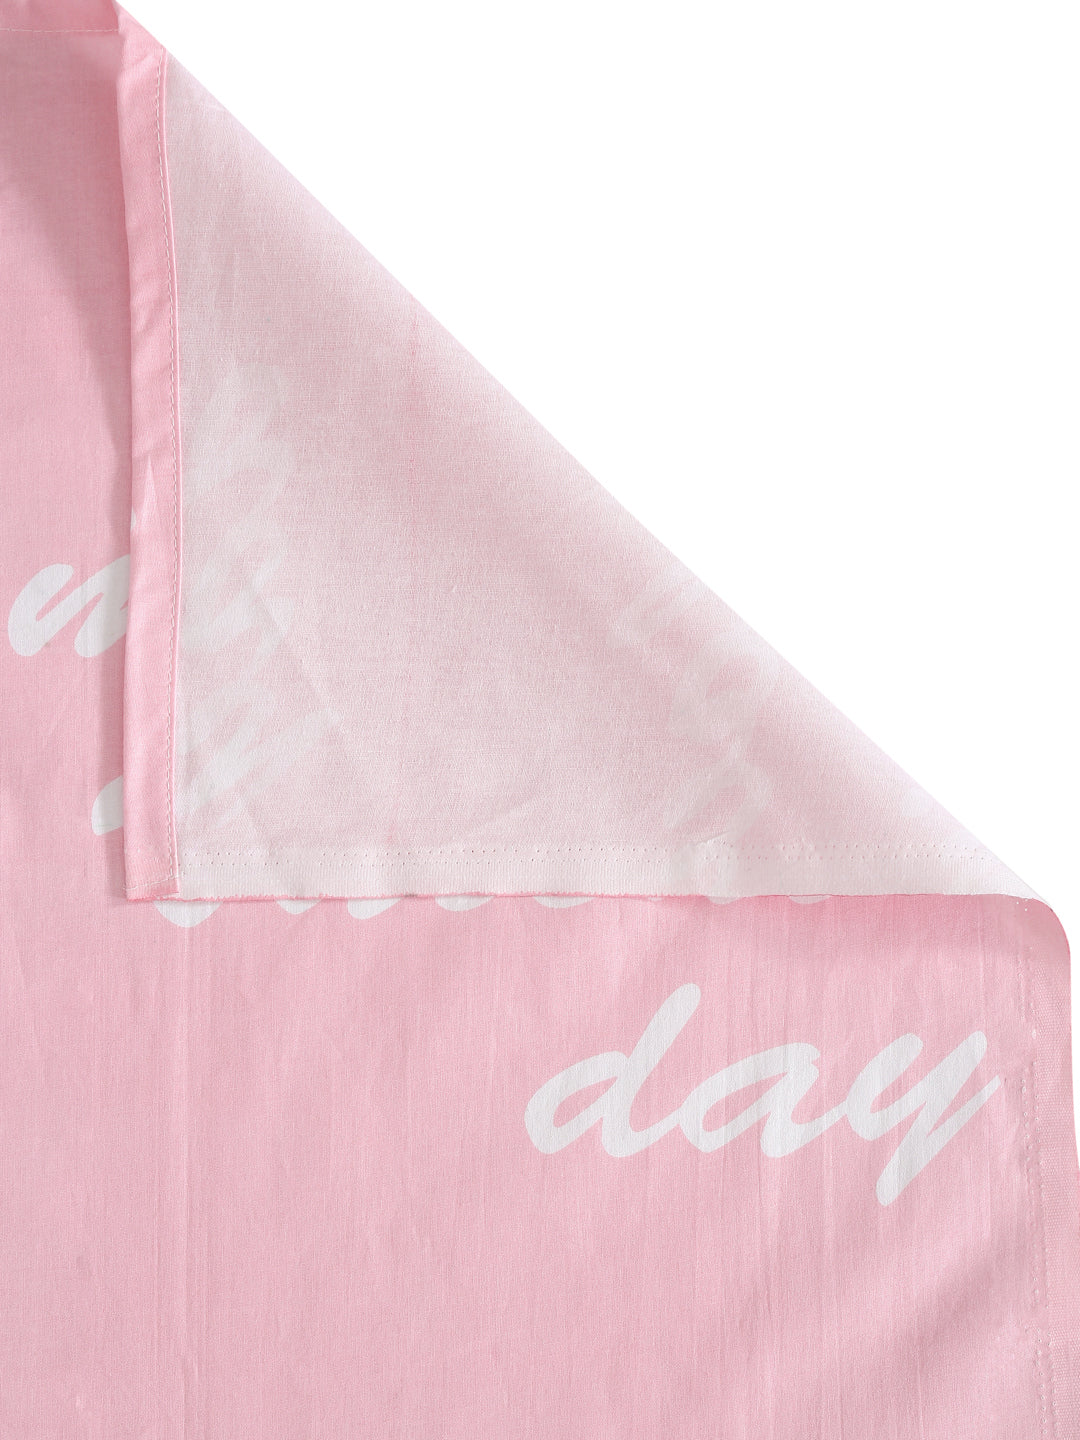 Klotthe Kids Pink Cotton 300 TC Double Bedsheet with 2 Pillow Covers